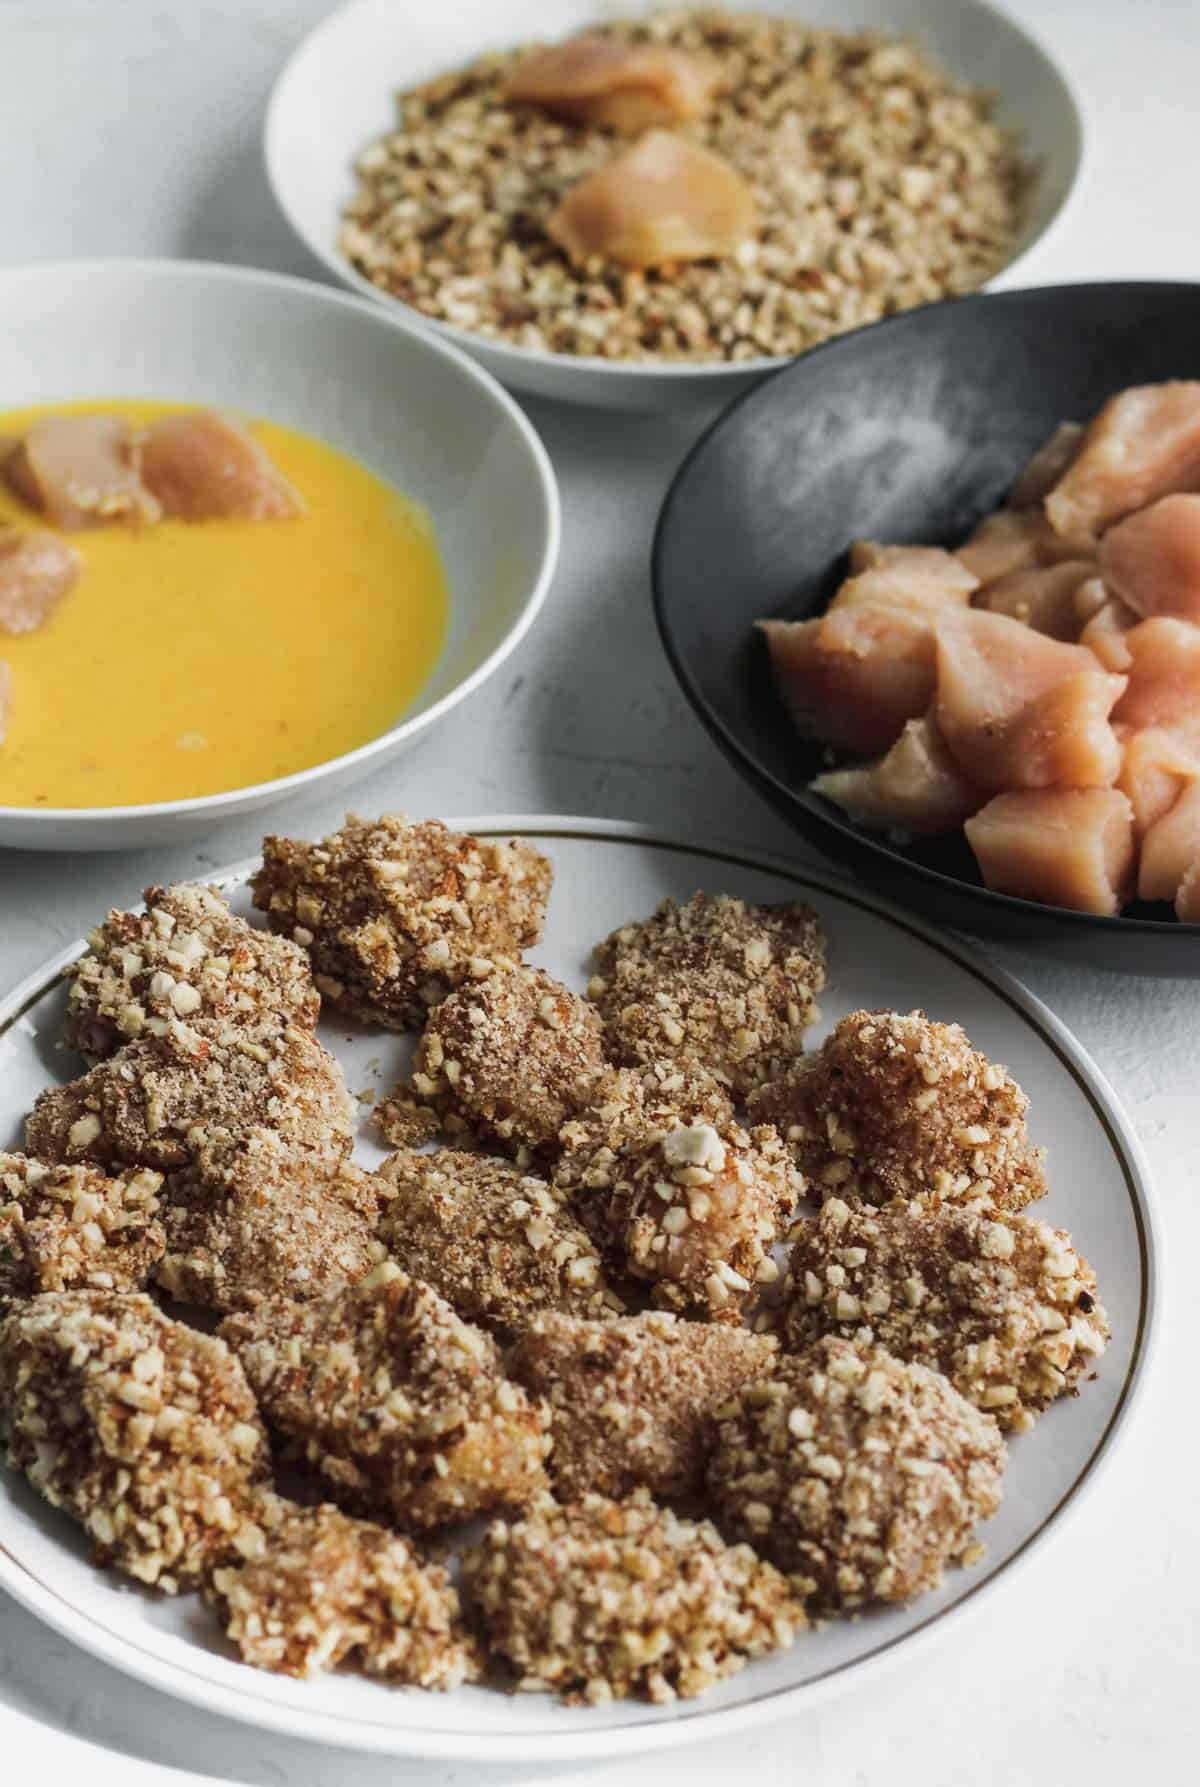 Separate bowls with the beaten egg, crushed almonds, raw chicken, and almond coated chicken. 